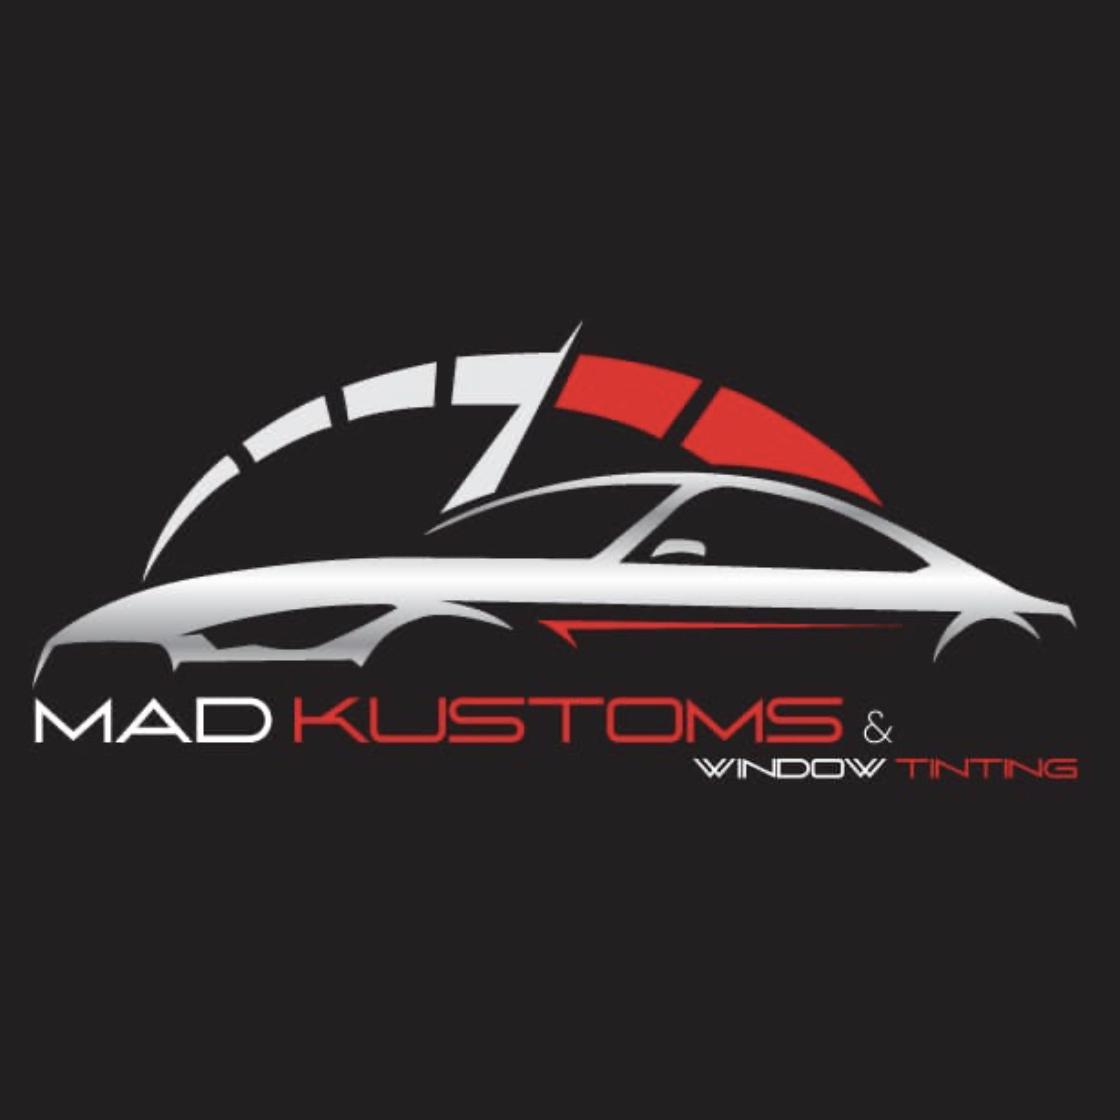 Mad Kustoms's images